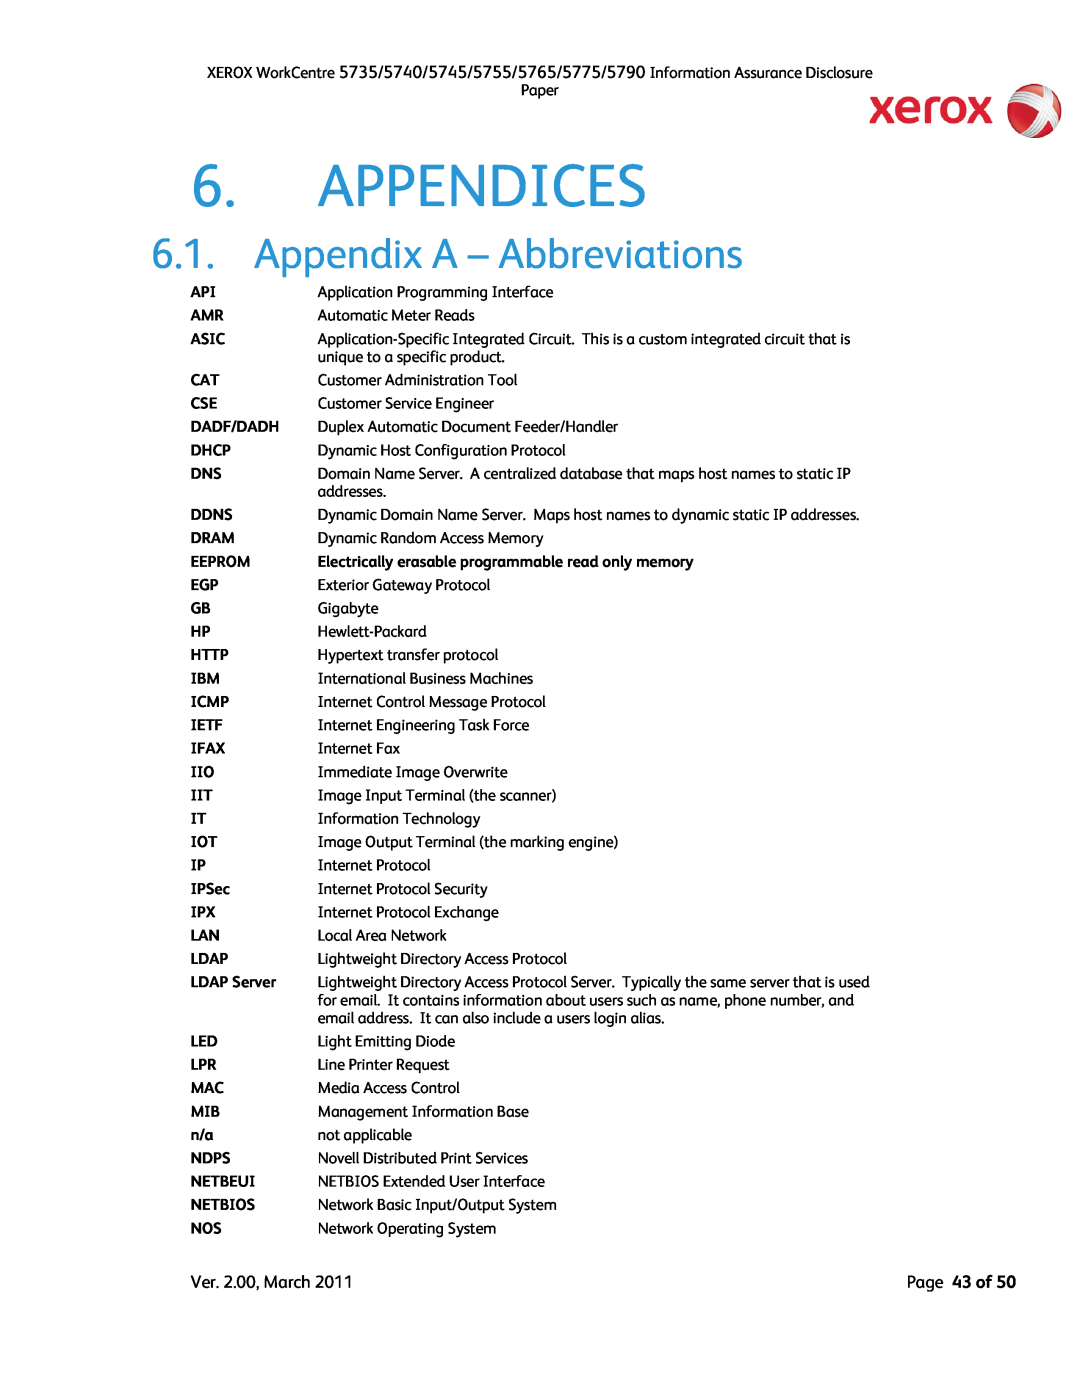 Xerox 5775 Appendices, Appendix A – Abbreviations, Application Programming Interface, Automatic Meter Reads, Asic, Dhcp 